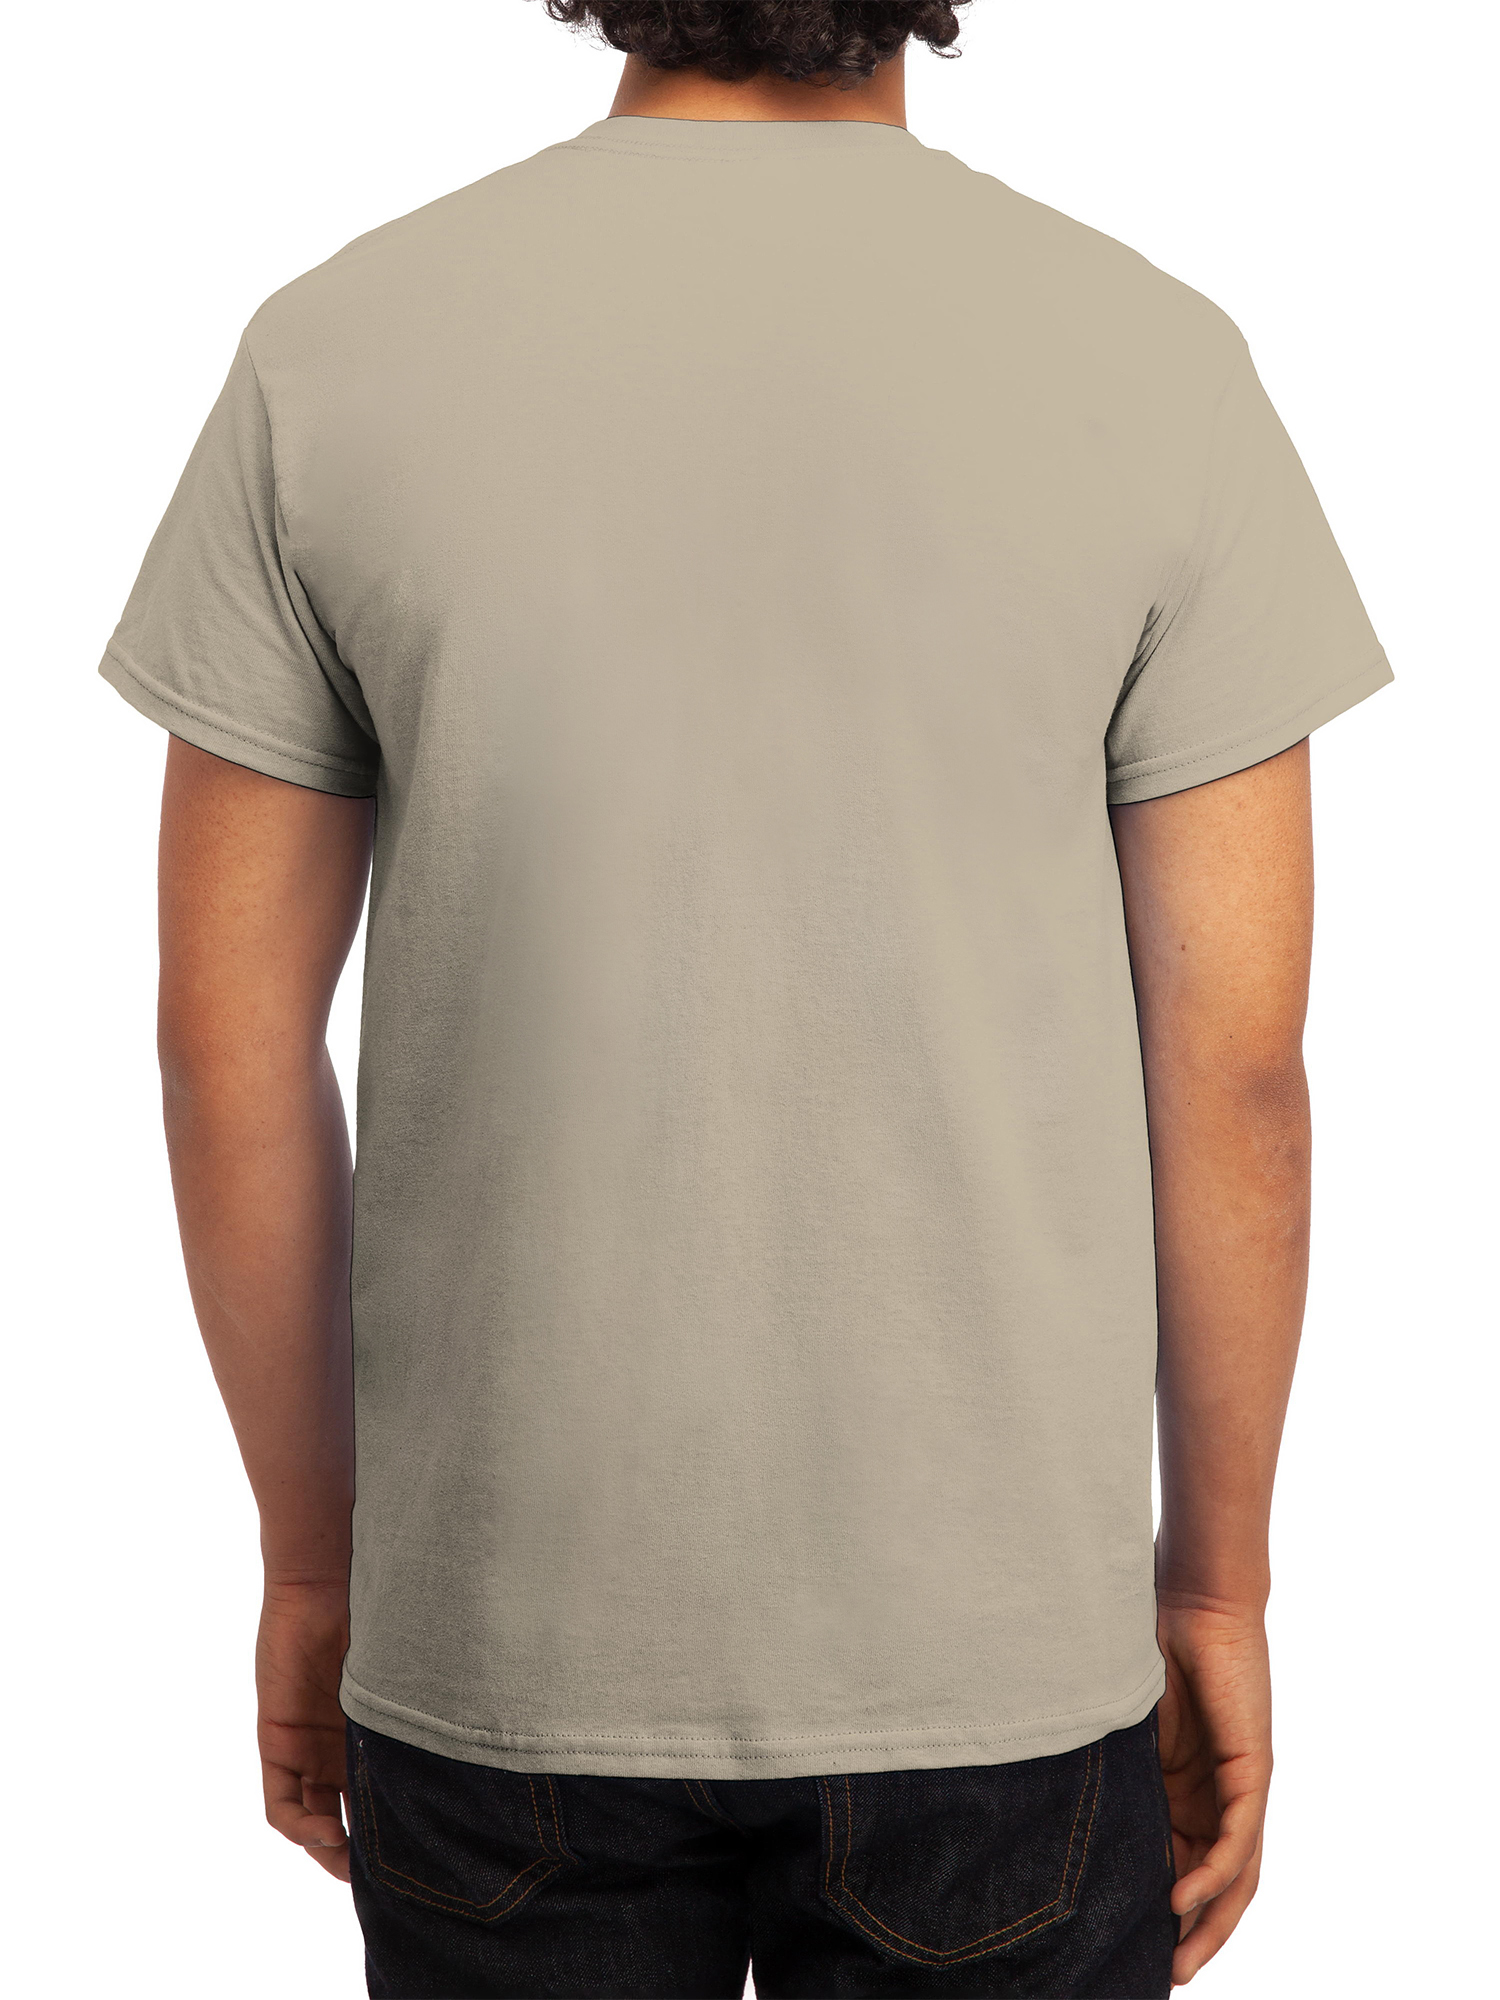 Attack On Titan Men's Short Sleeve Graphic Tee - image 2 of 2